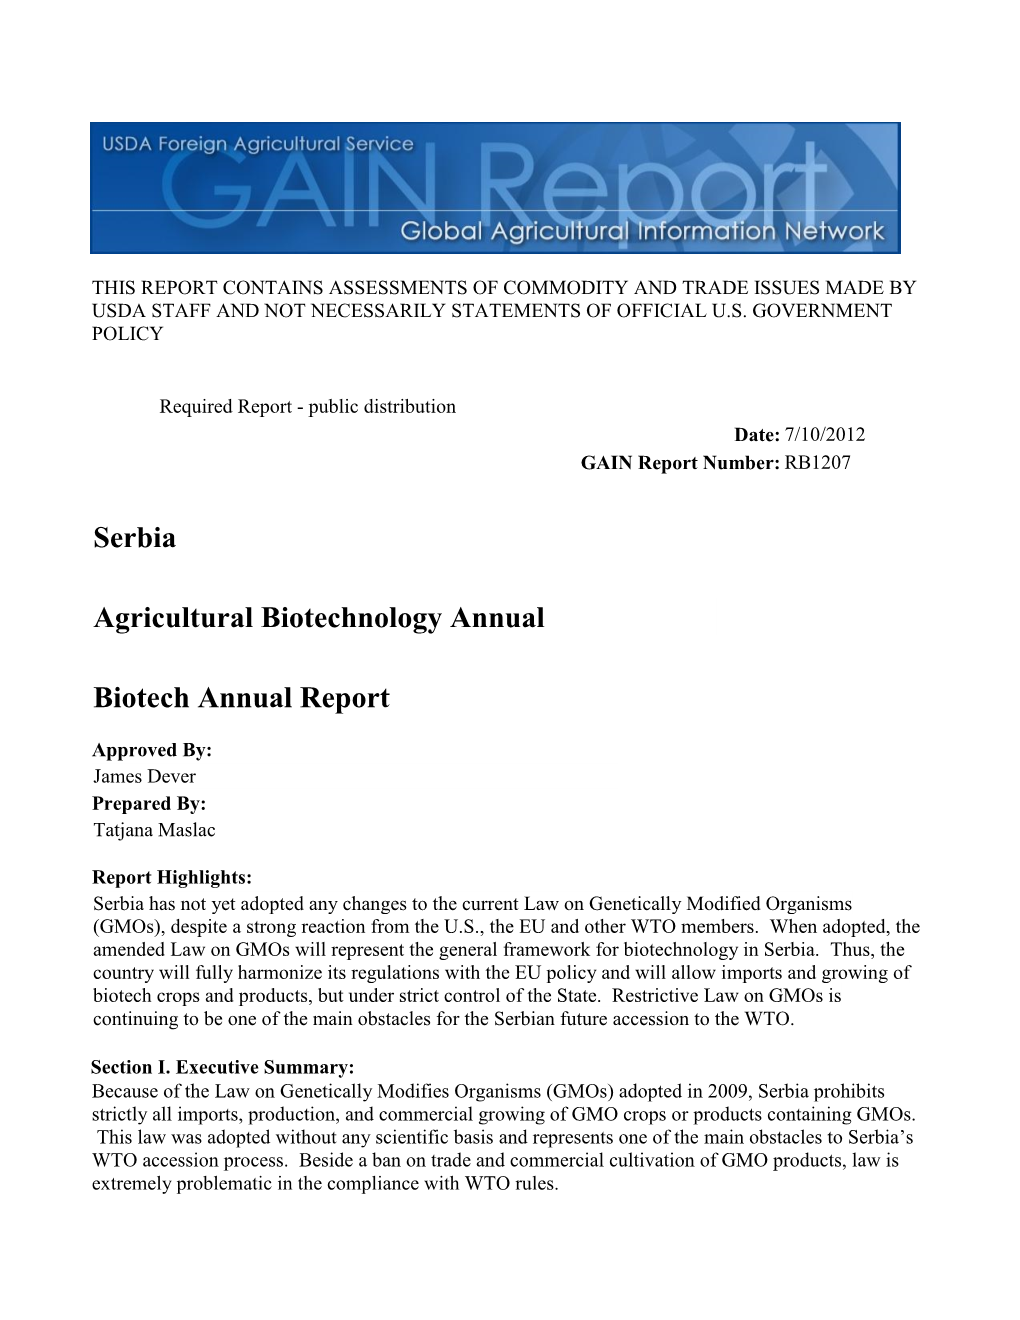 Biotech Annual Report Agricultural Biotechnology Annual Serbia